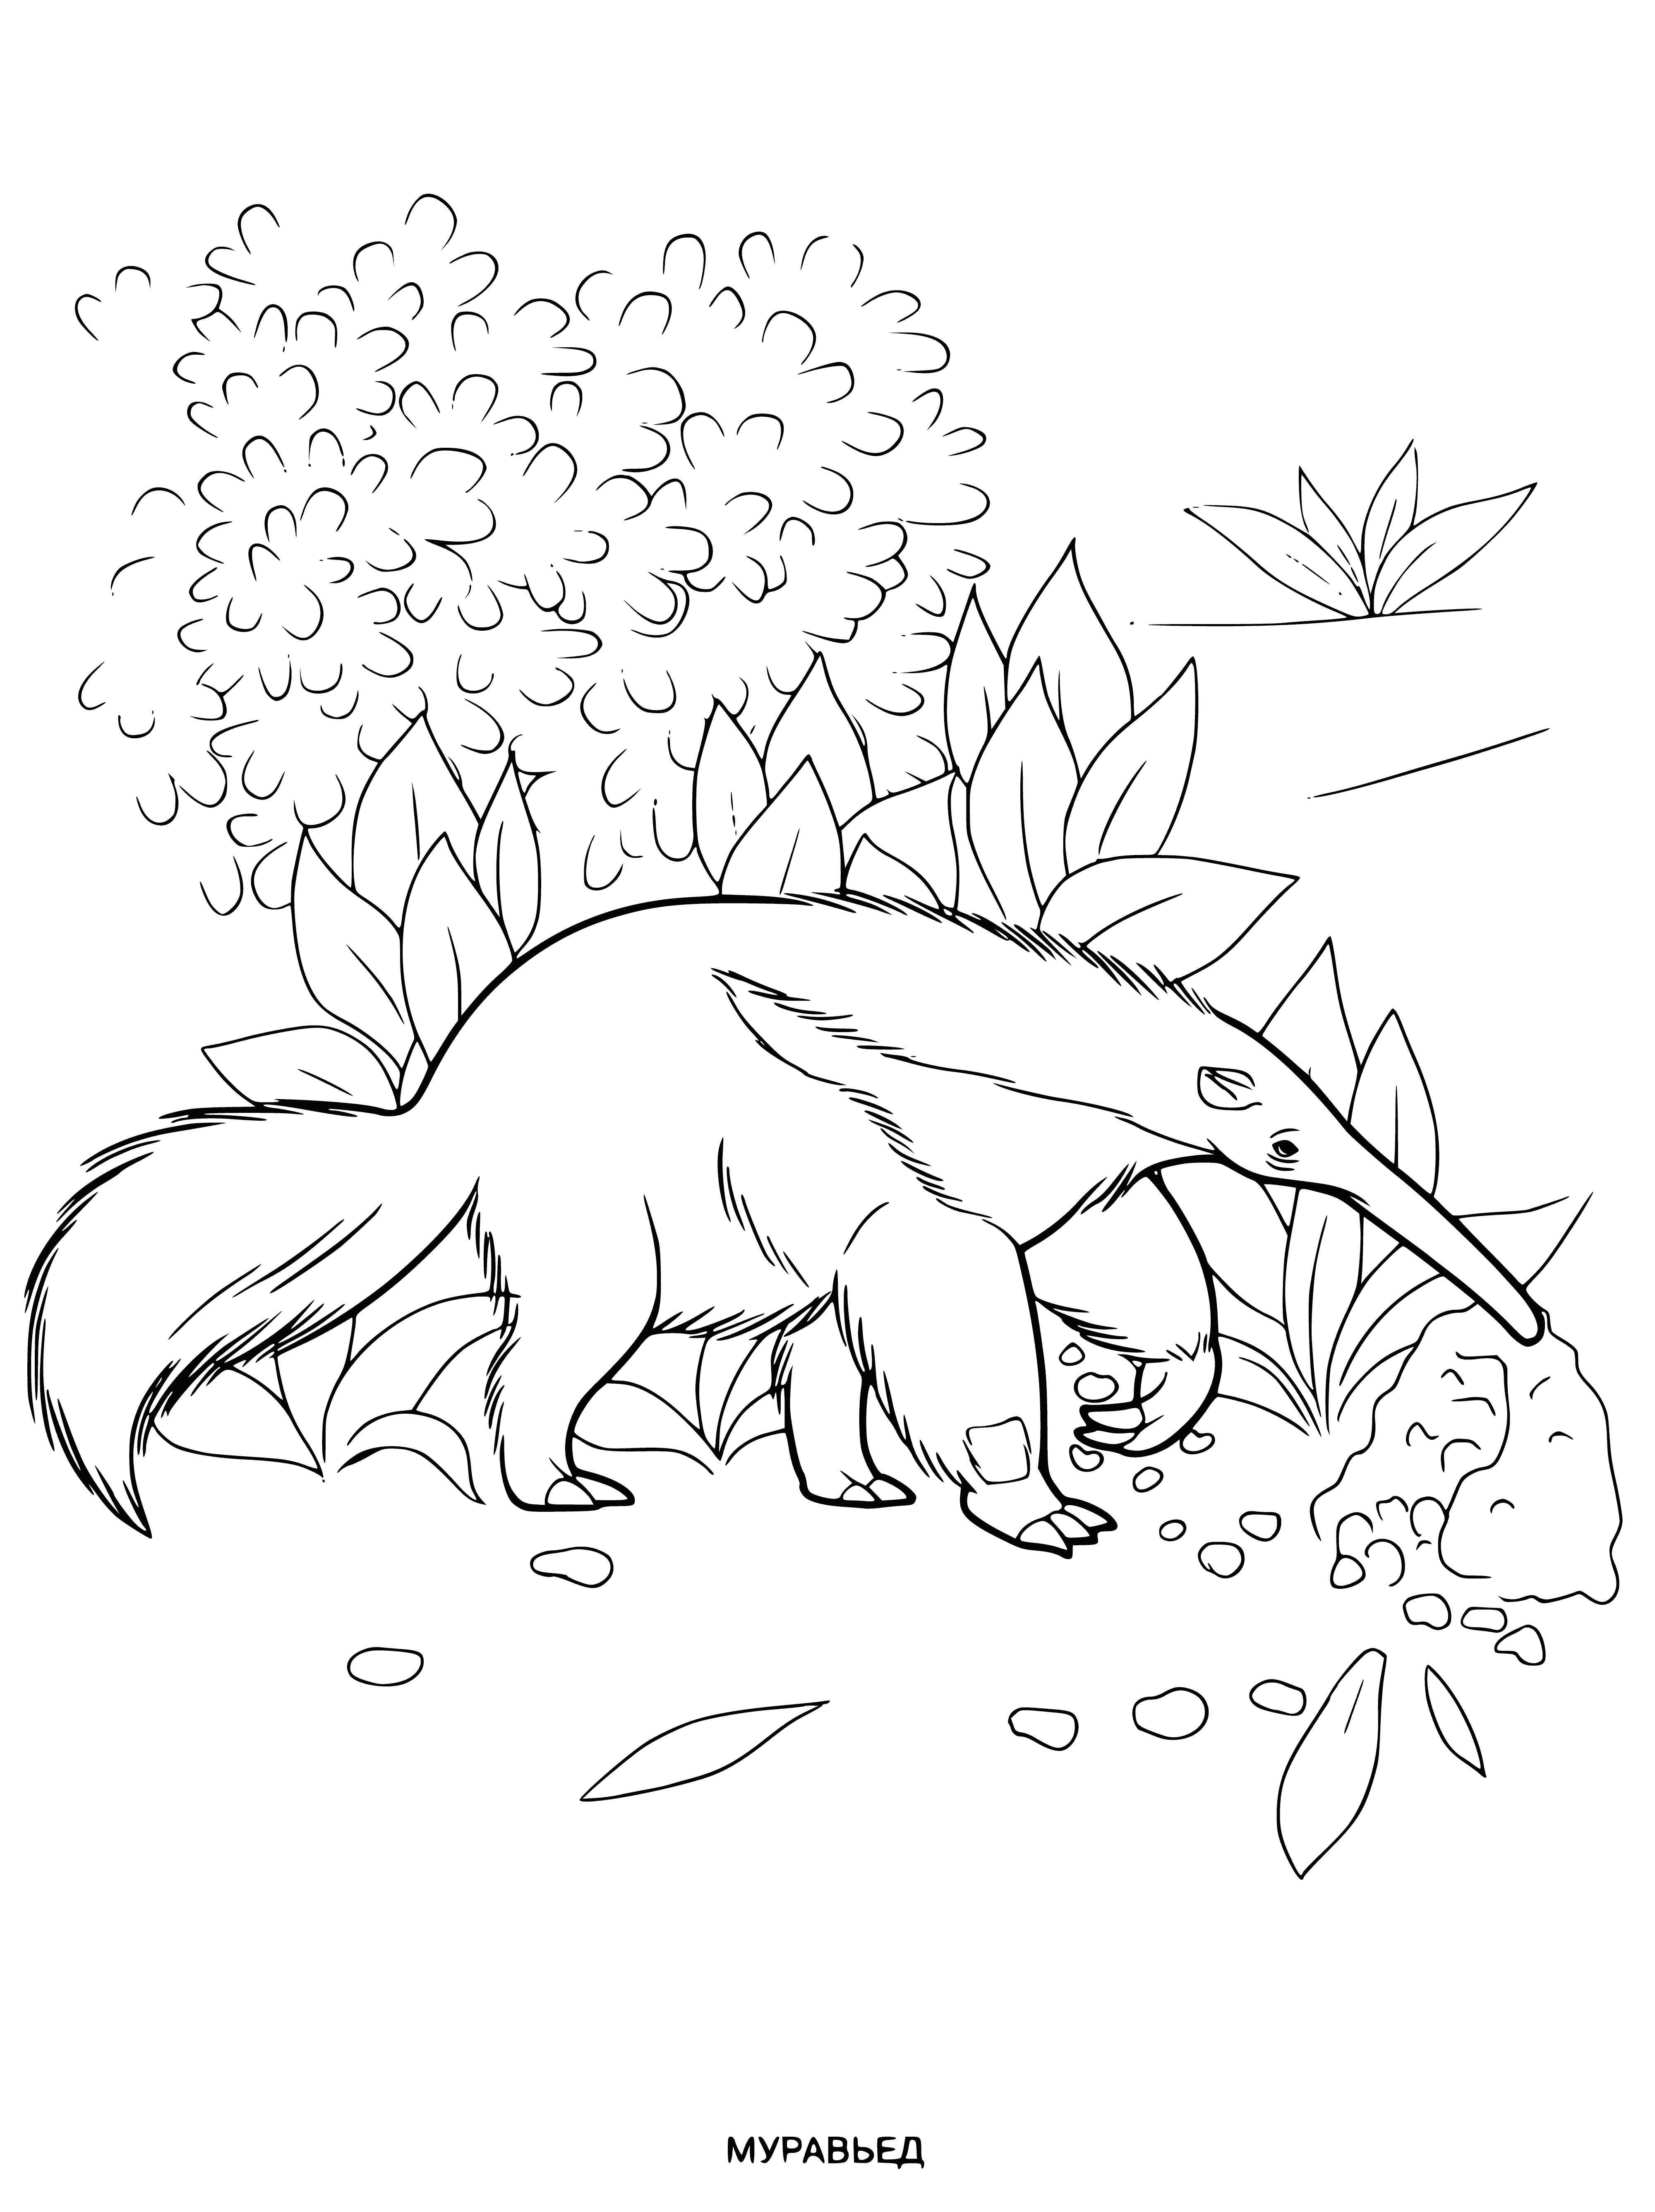 coloring page: Long-nosed animal stands on hind legs eating ants with their long, thin tongue.